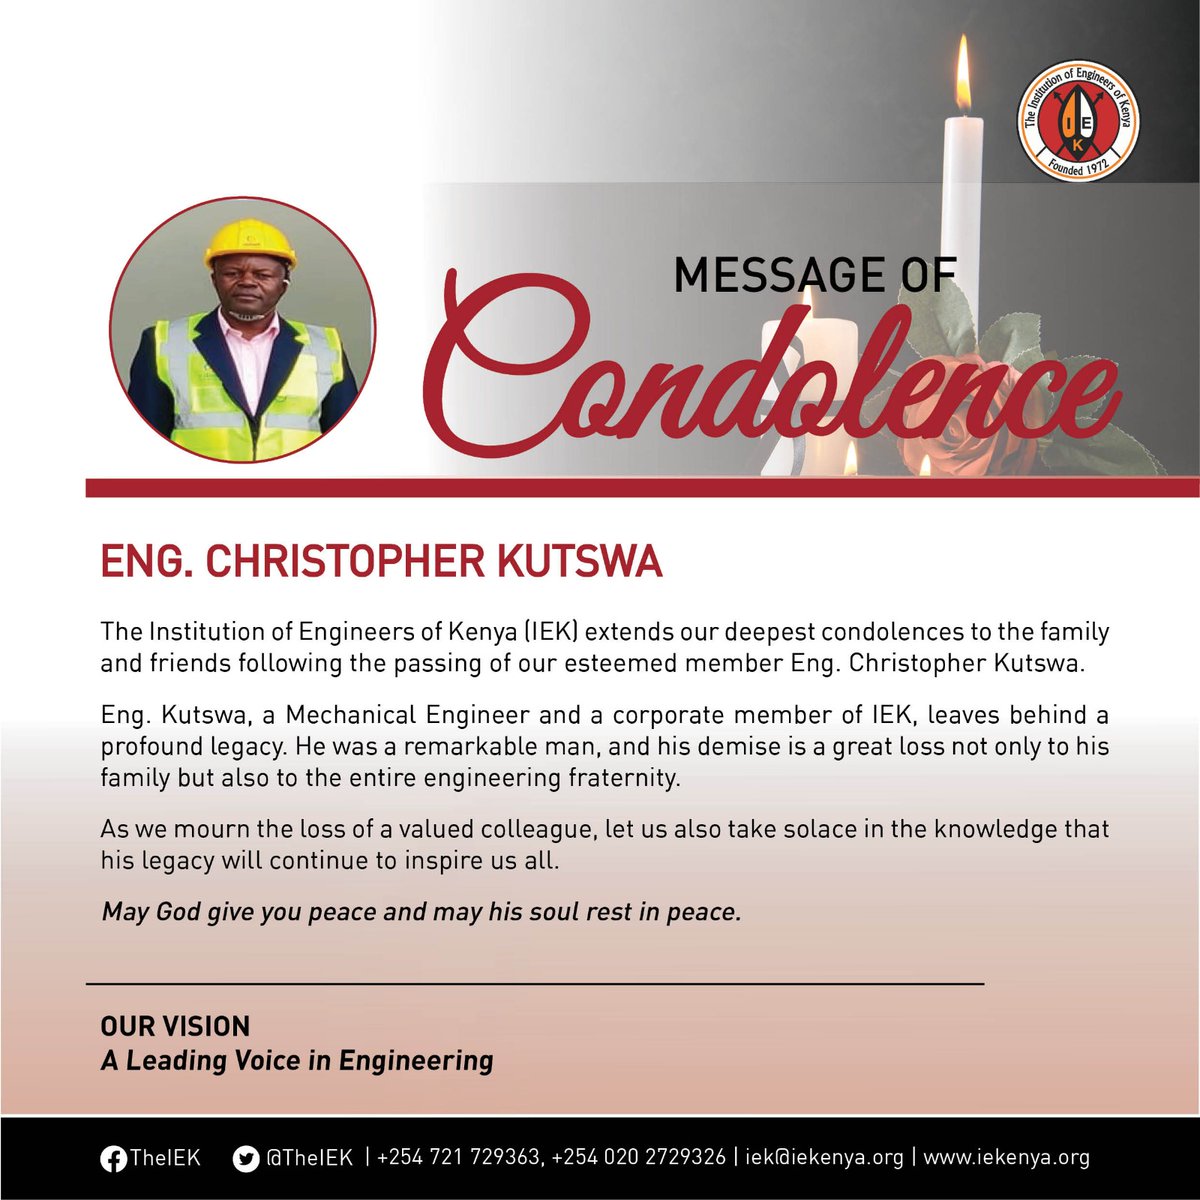 The Institution of Engineers of Kenya (IEK) extends our deepest condolences to the family and friends following the passing of our esteemed member Eng. Christopher Kutswa.